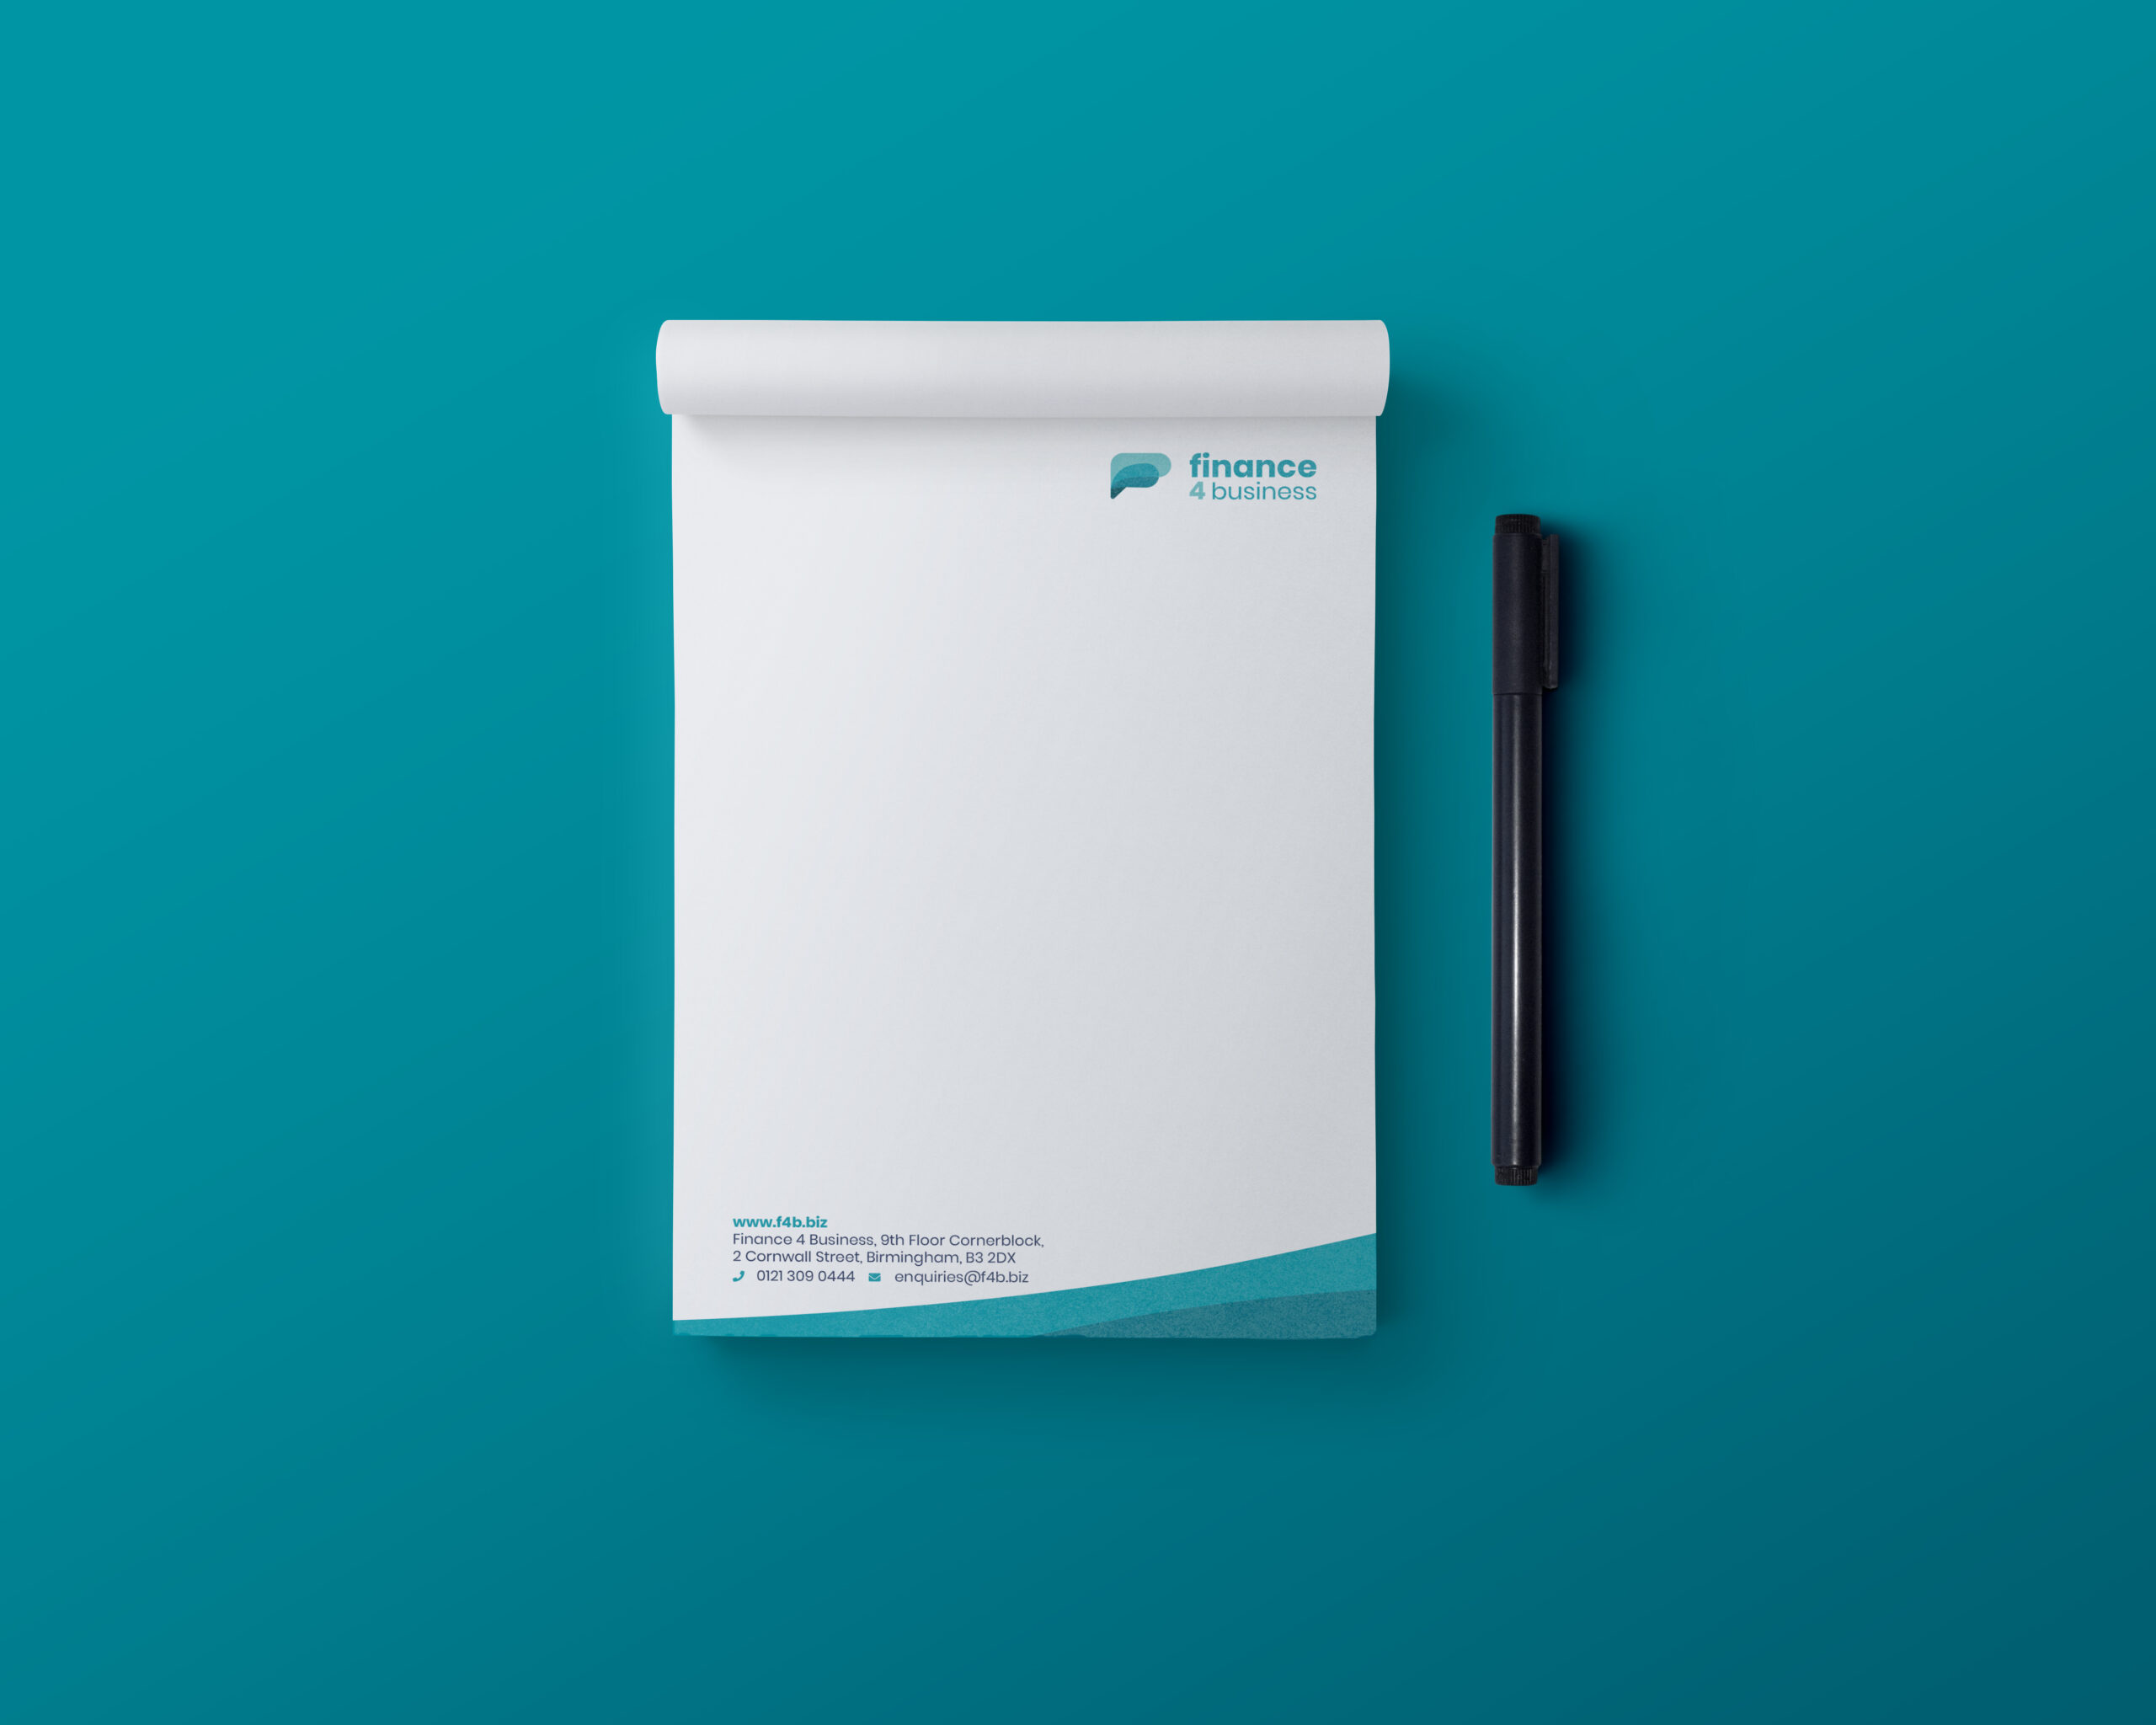 Finance For Business branded products - branded pen and notepad